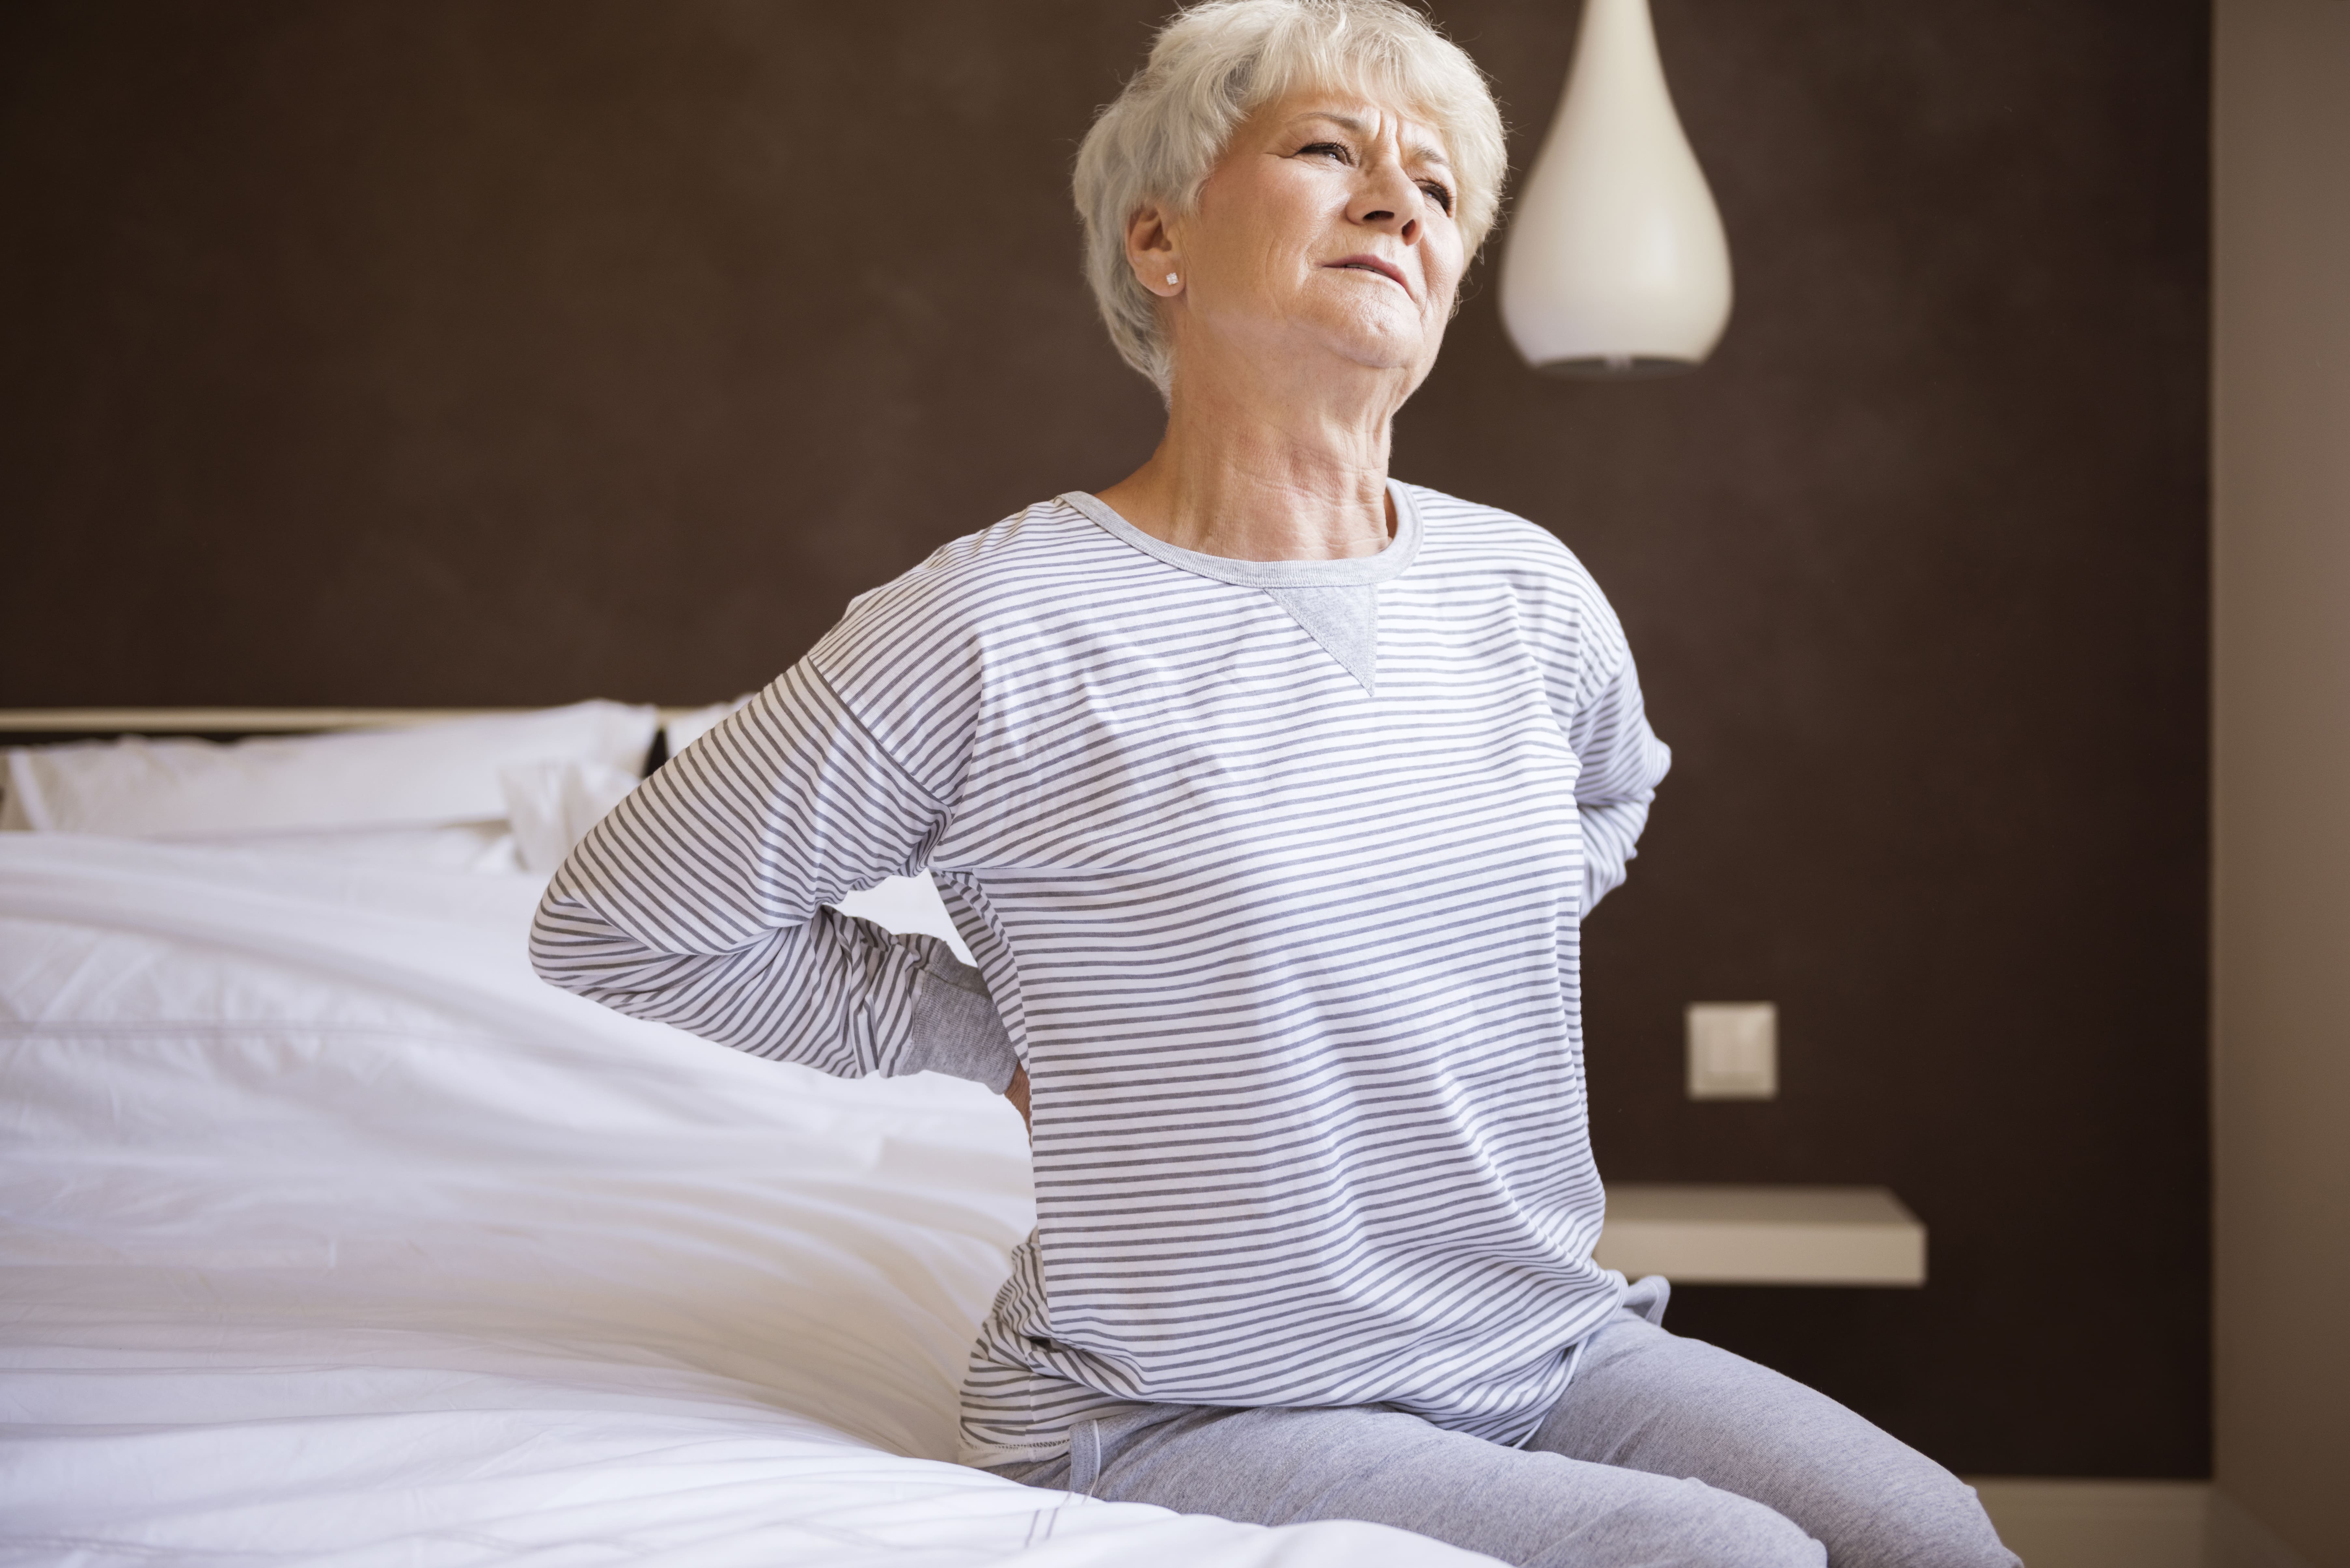 An older woman struggling with back pain as she gets up from bed ┃ Image by gpointstudio